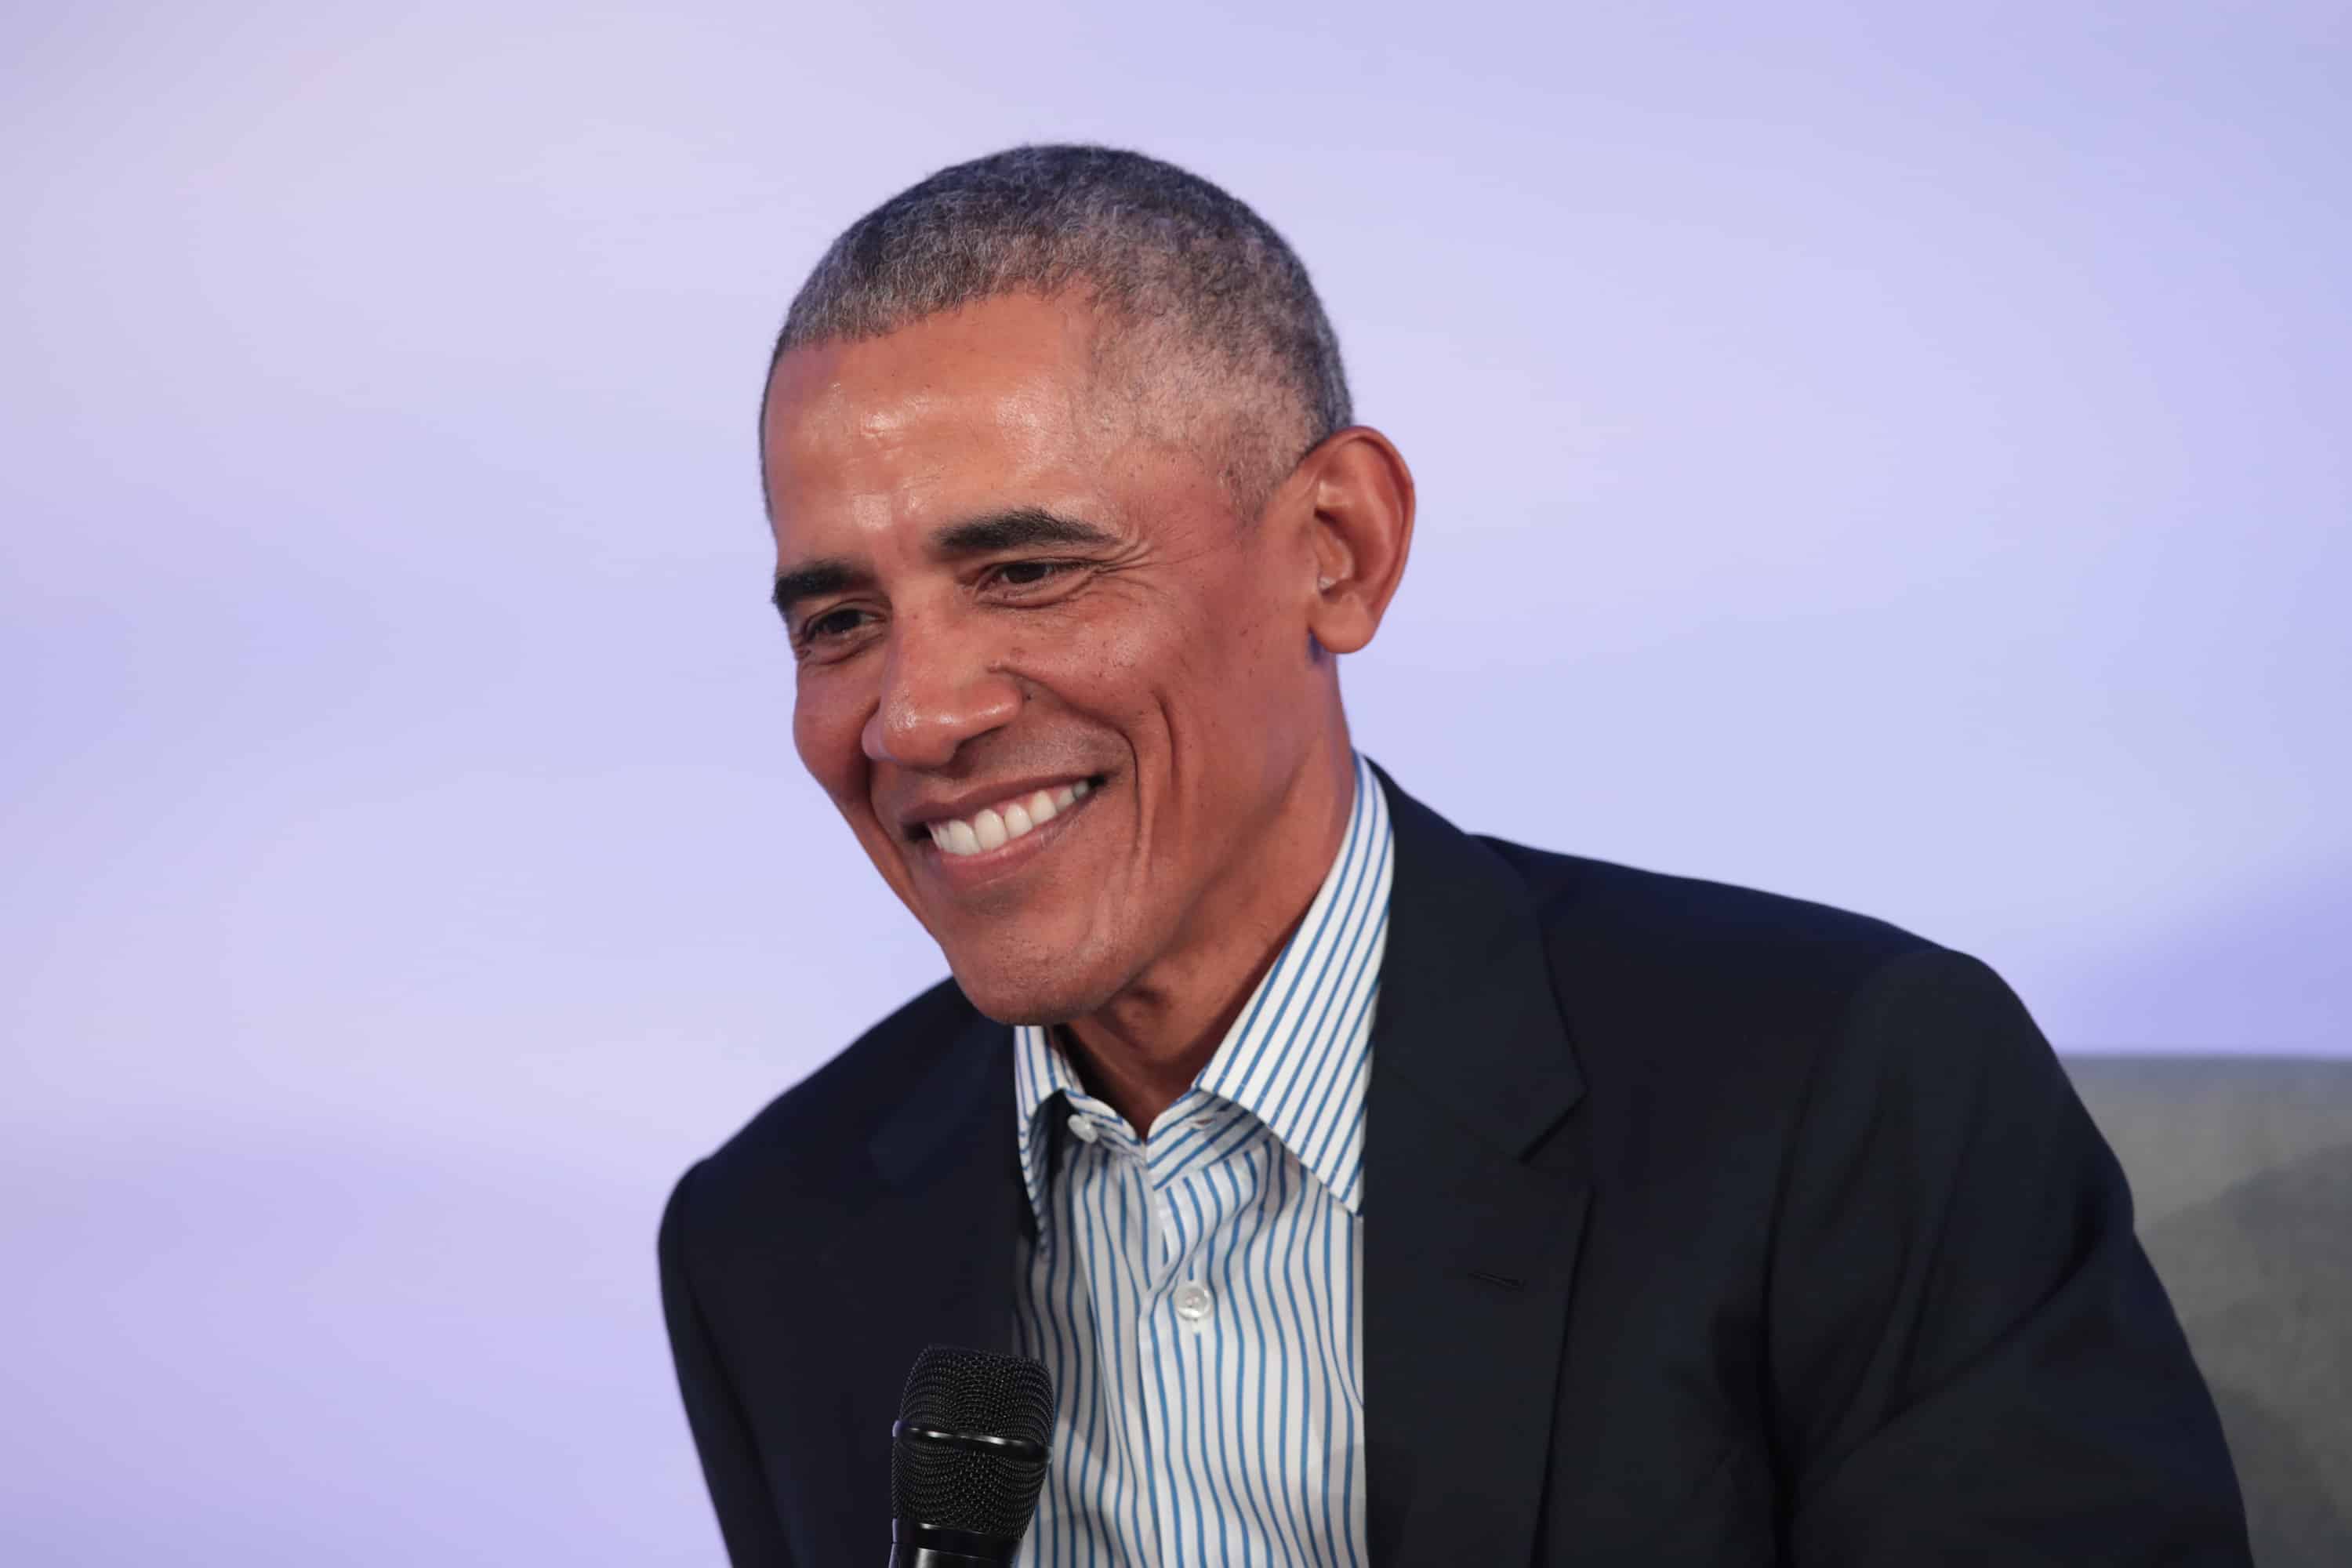 Barack Obama delivered a powerful speech to the 2020 graduates from all of the historically black colleges and universities throughout the country.